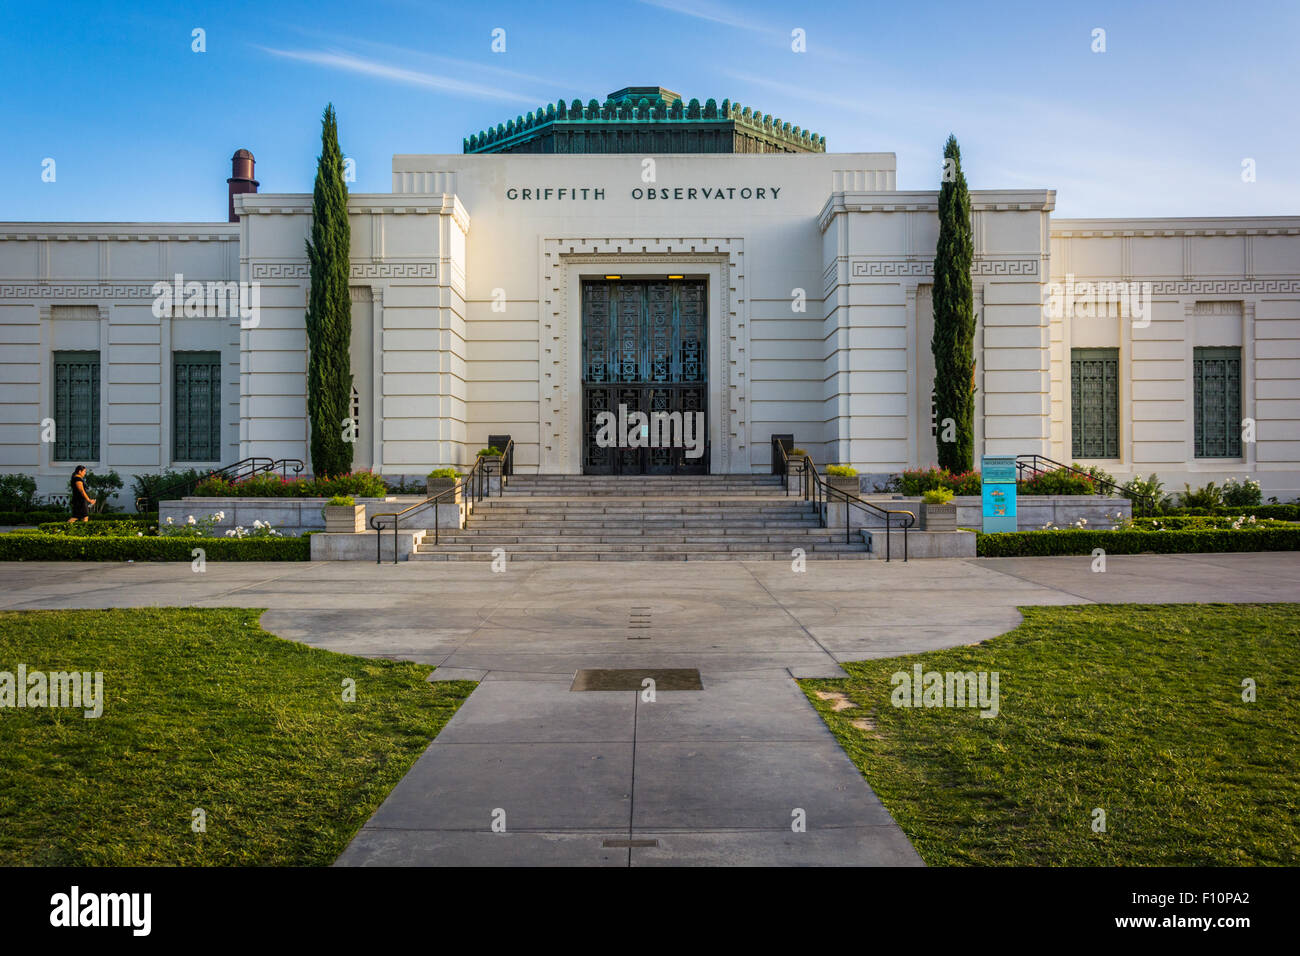 Griffith Observatory, in Griffith Park, Los Angeles, California. Stock Photo